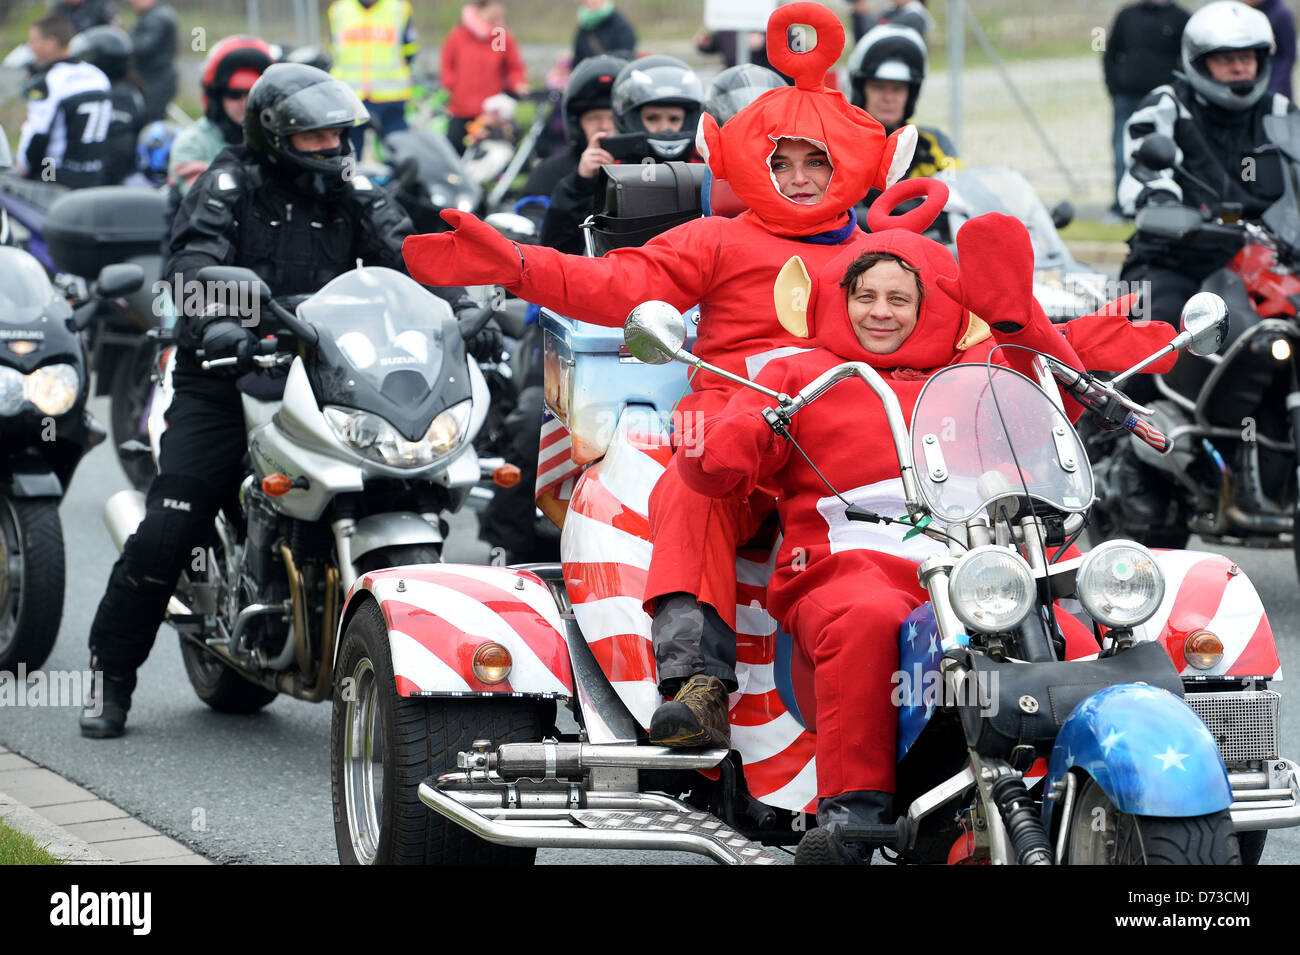 Participants of a motorcycle rally dressed as Teletubbies sit in a trike in Kulmbach, Germany, 28 April 2013. According to police, the motorcycle star ride in Kulmbach is the largest motorcycle rally in South Germany, which took place under the motto 'Arrive rather perish' for the 13th time. Photo: DAVID EBENER Stock Photo